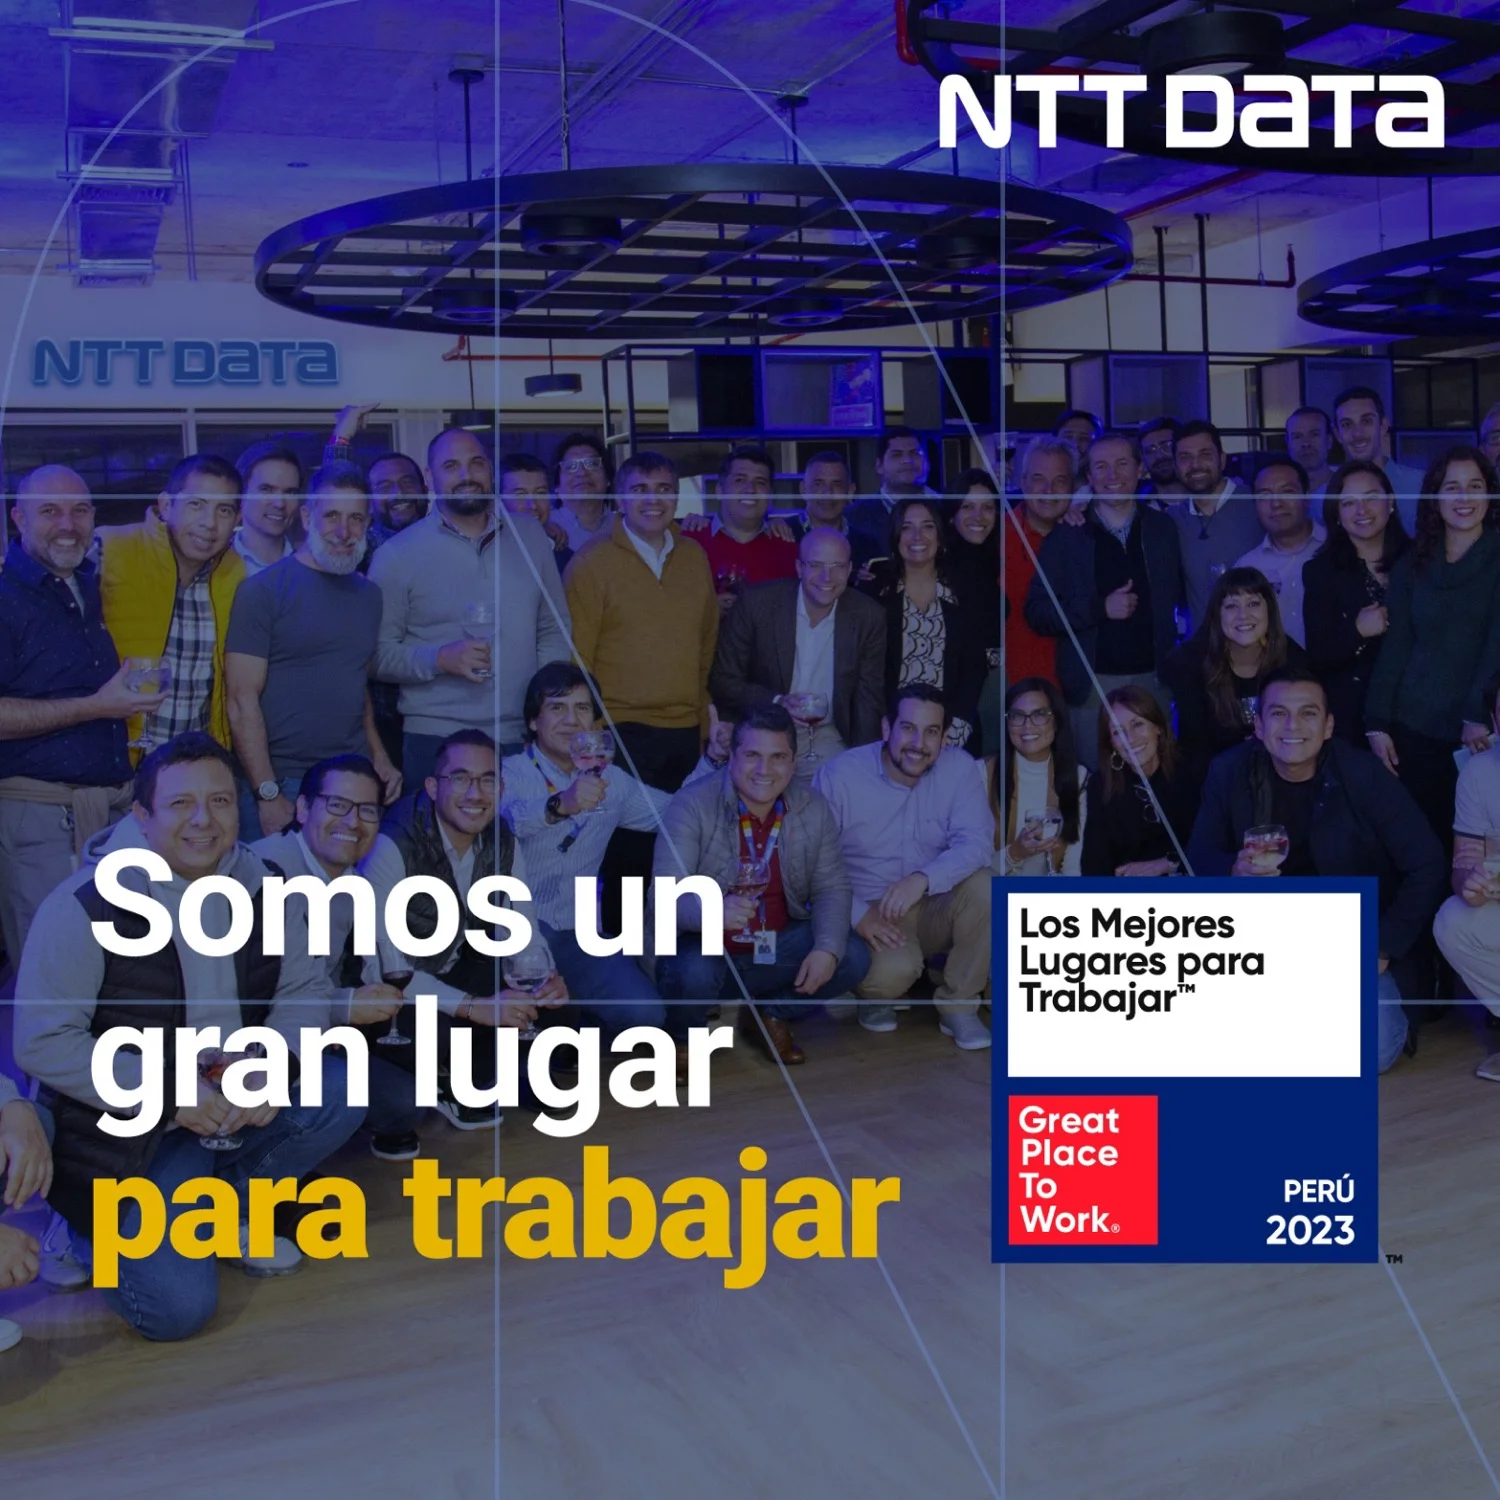 Great Place to Work-Certified reconoció a NTT DATA Perú